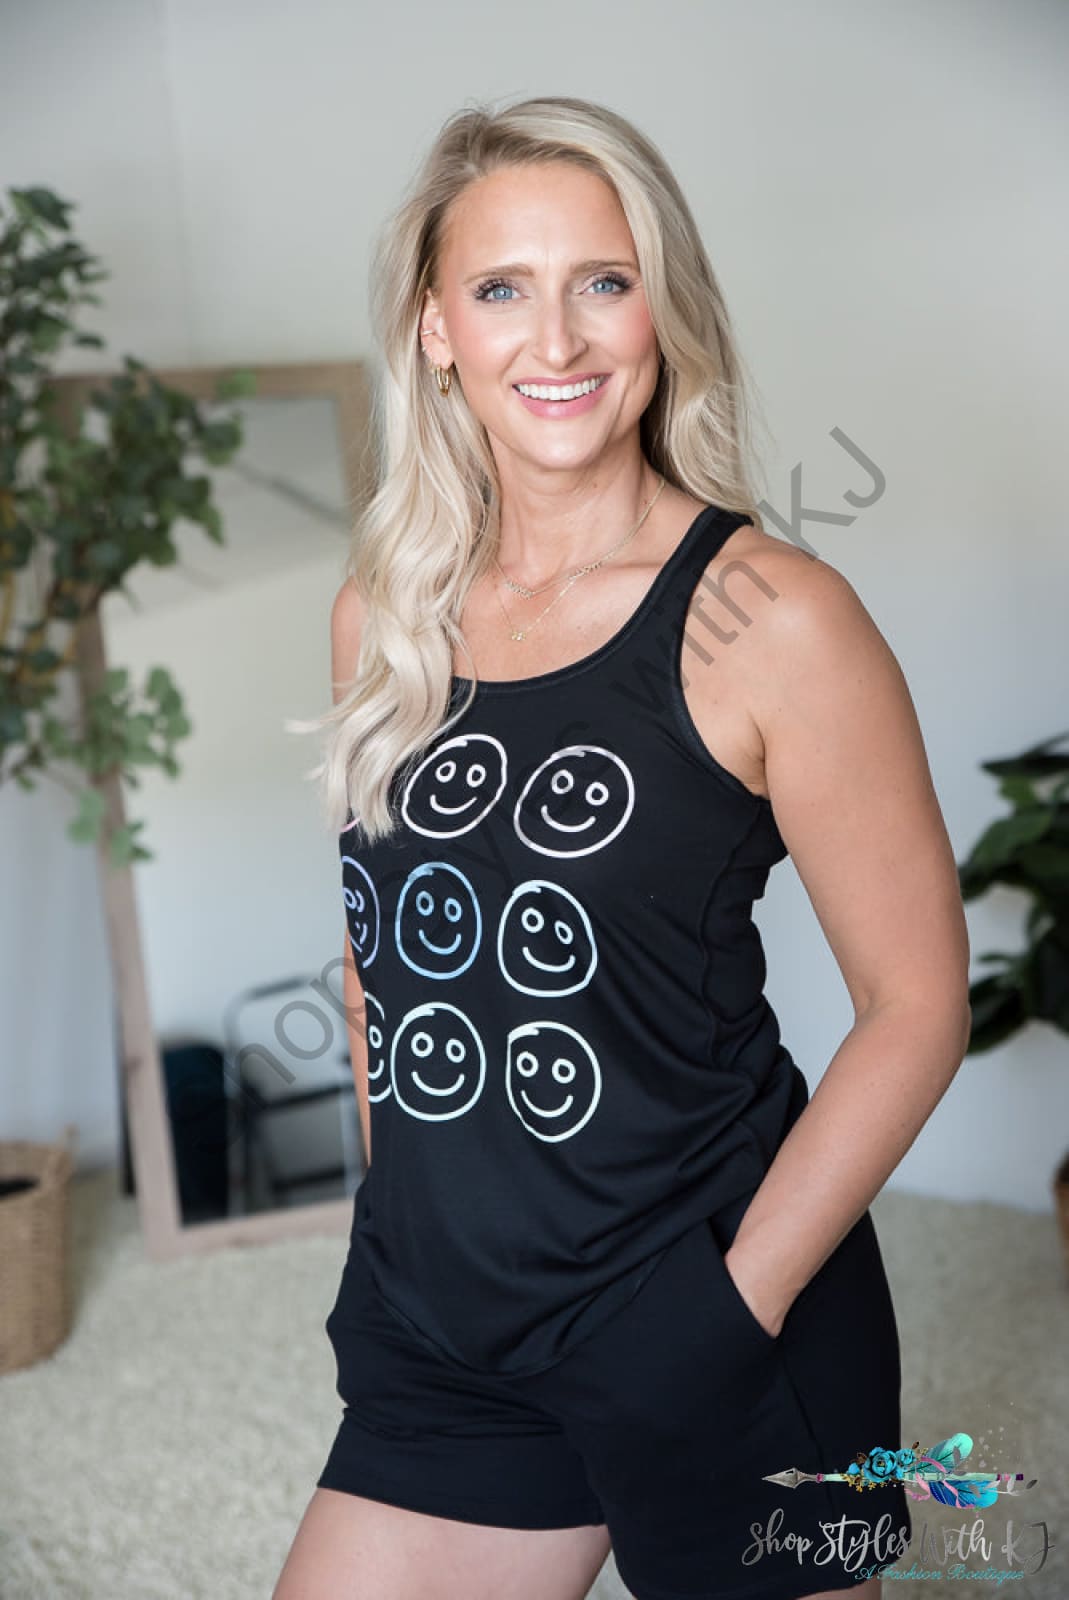 All Smiles Graphic Tank Bt Tee